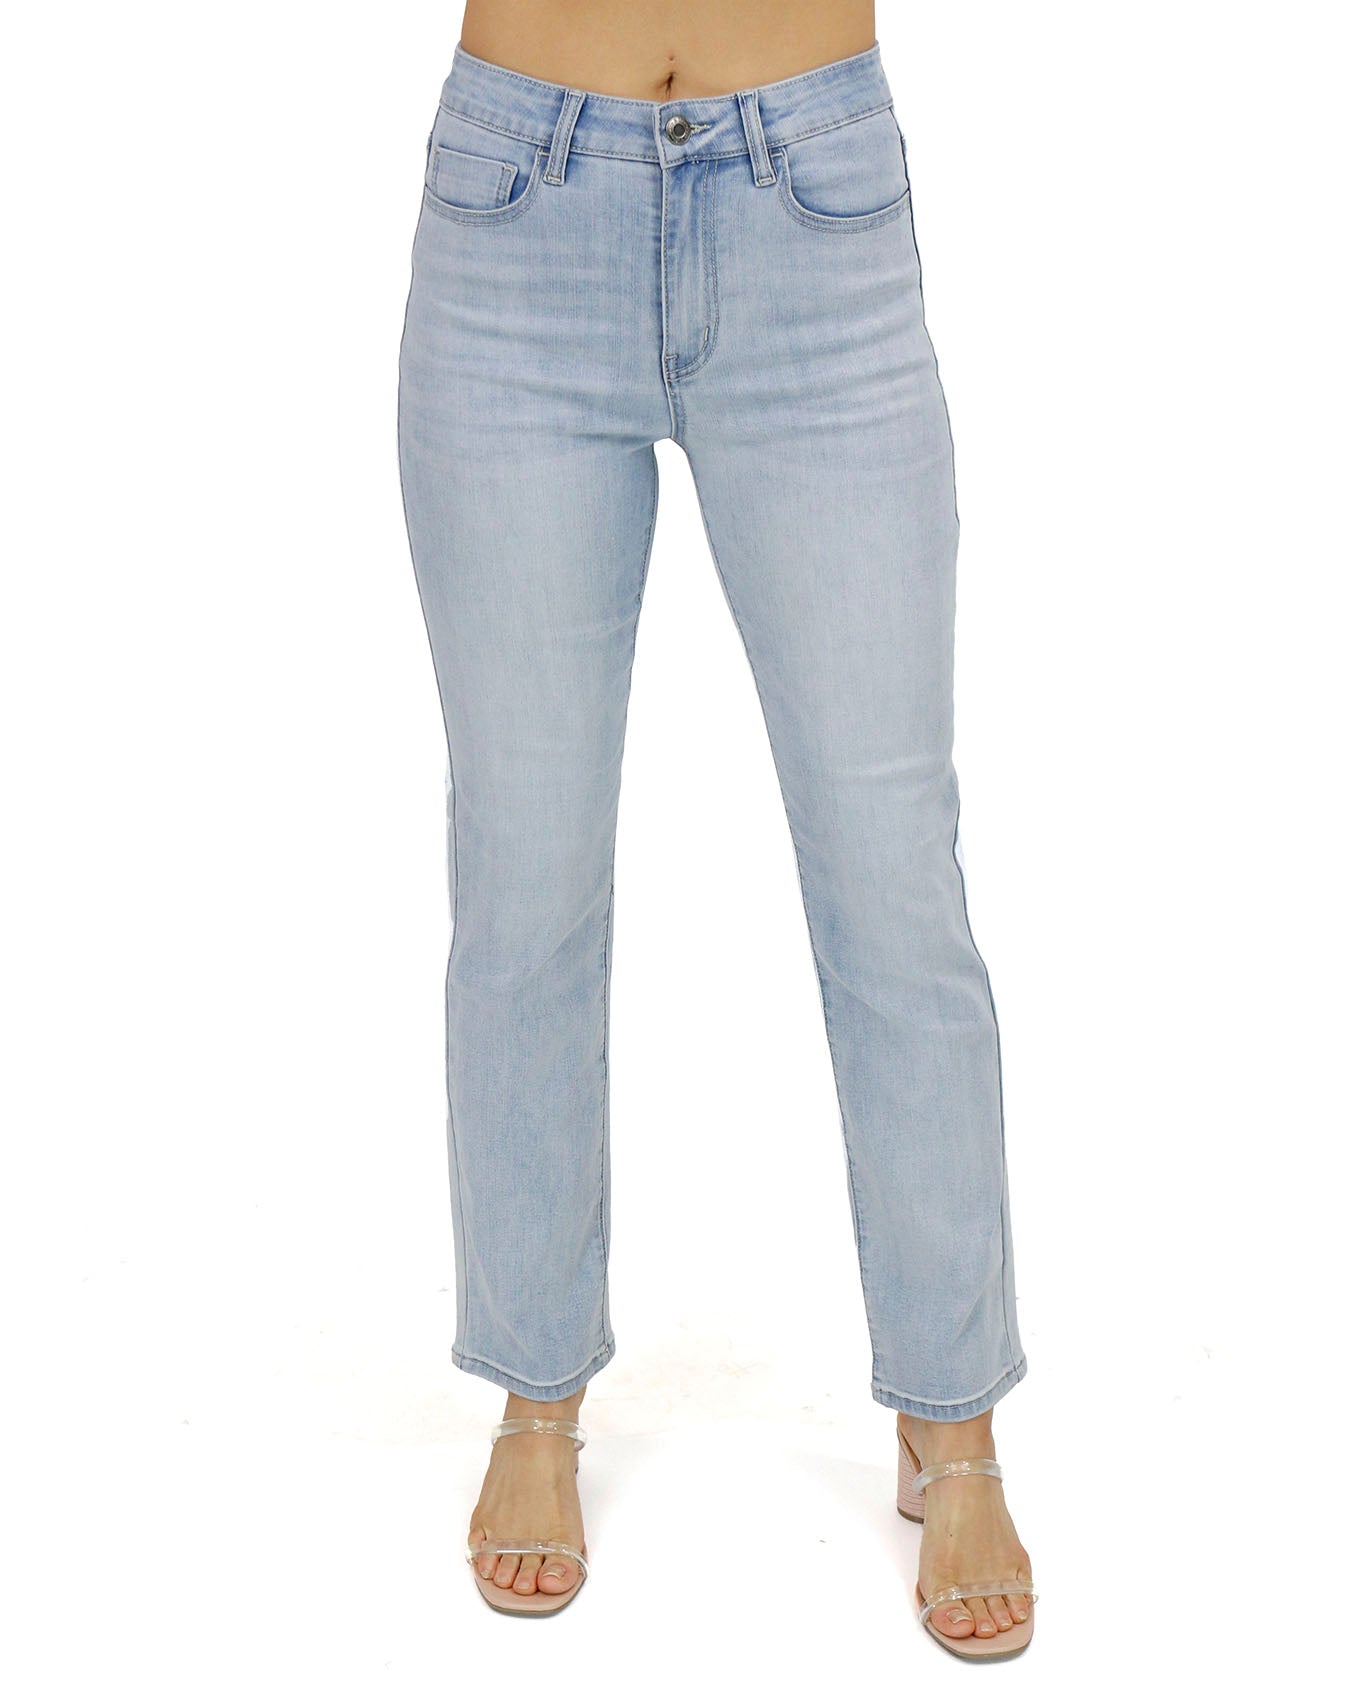 front view stock shot of non-distressed full length denim